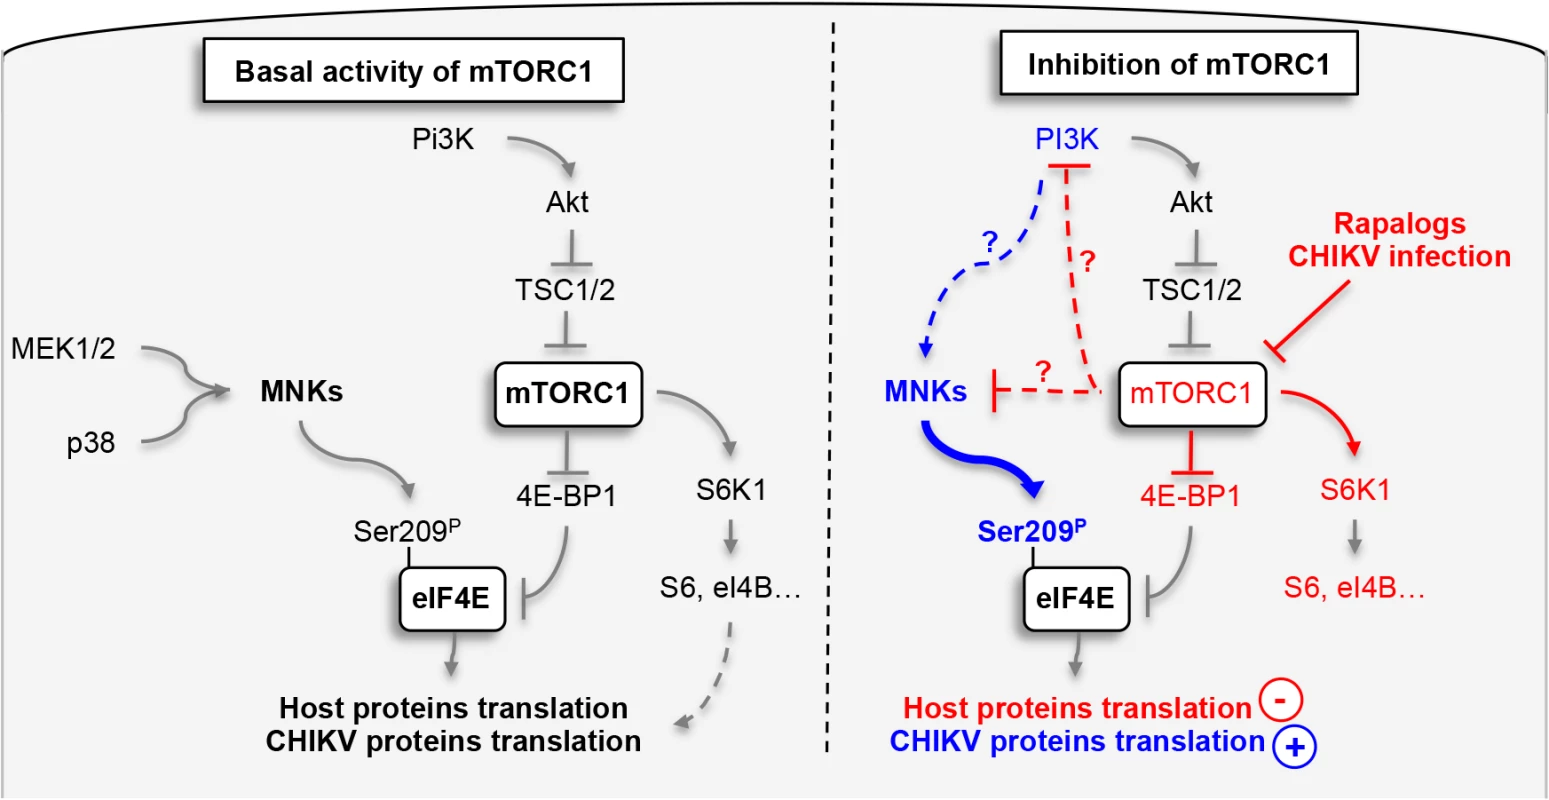 Schematic representation of mechanism by which CHIKV protein synthesis is increase by the inhibition of mTORC1.